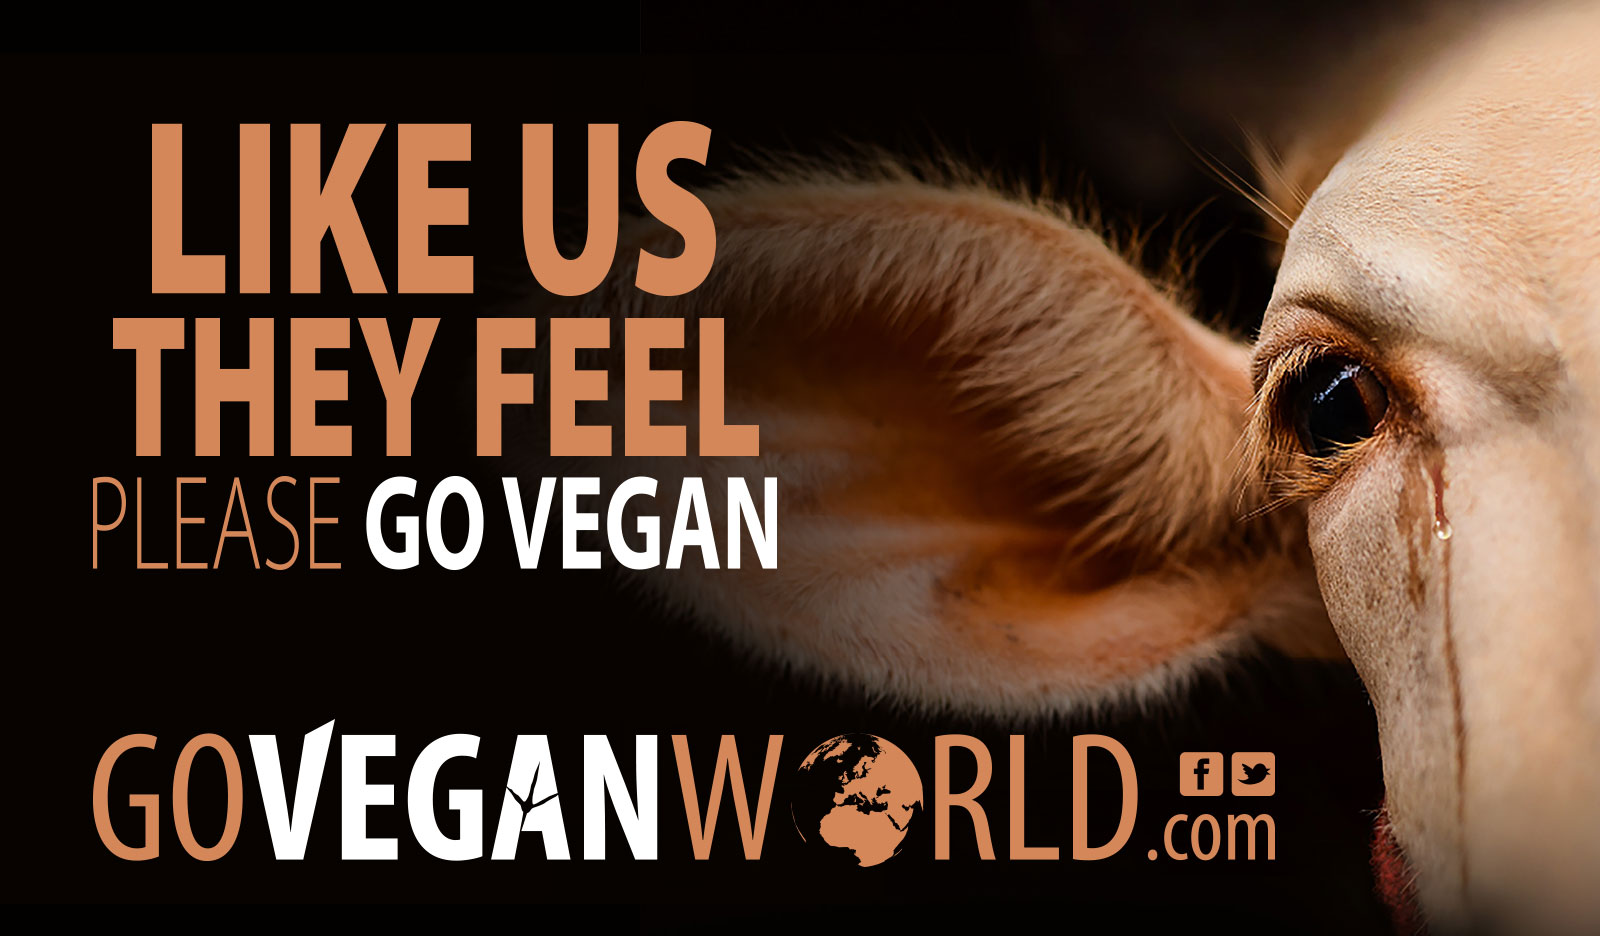 Why Vegans Talk about Veganism and Animal Rights - Go Vegan World